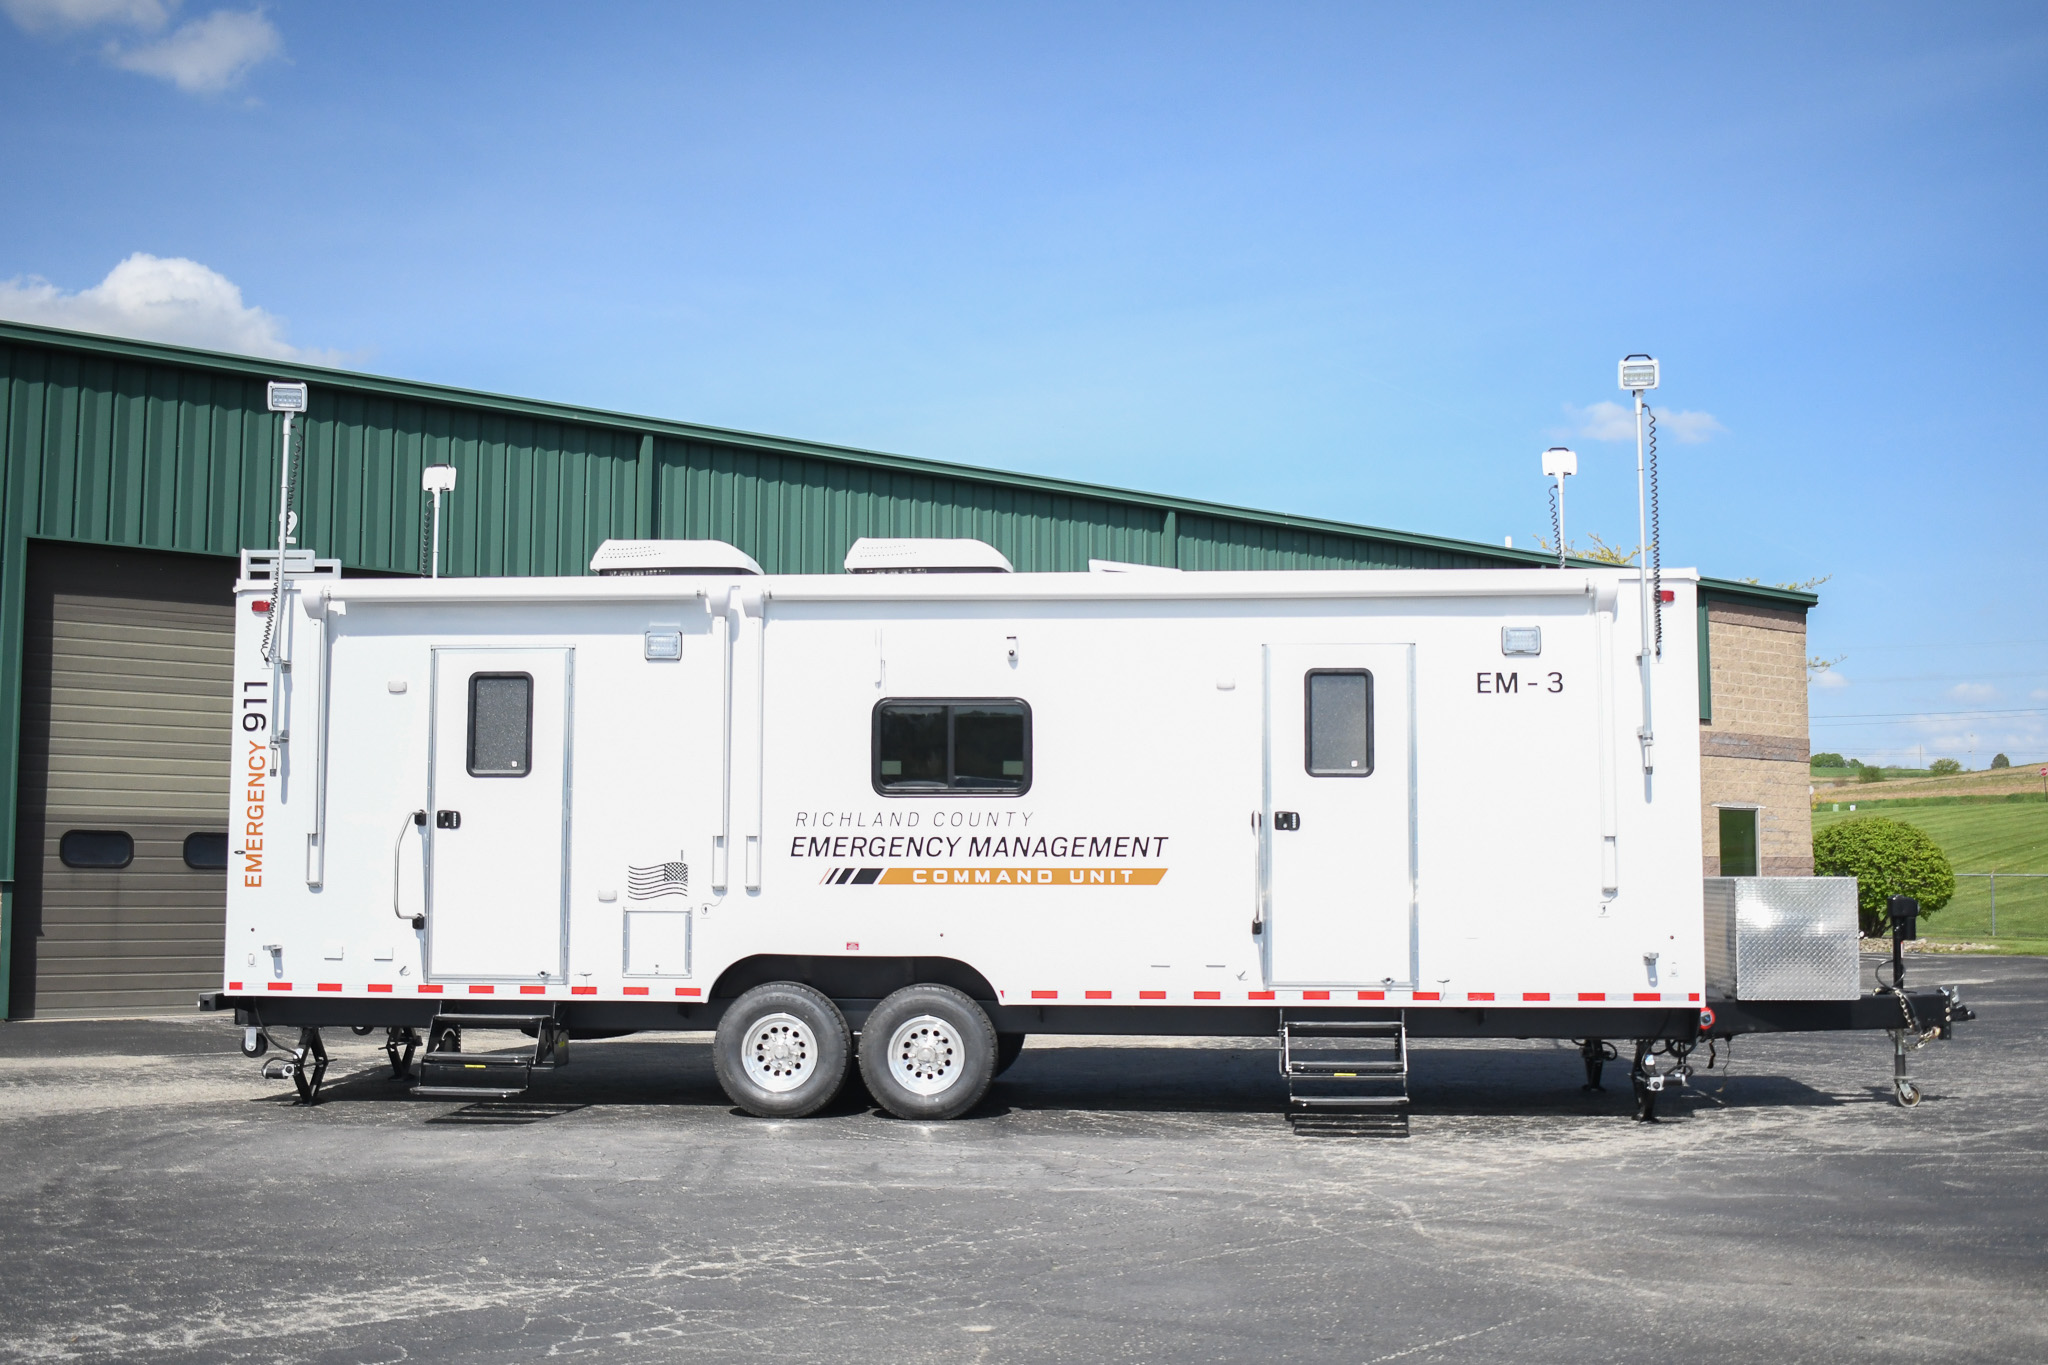 A side view of the unit for Richland County, MT.